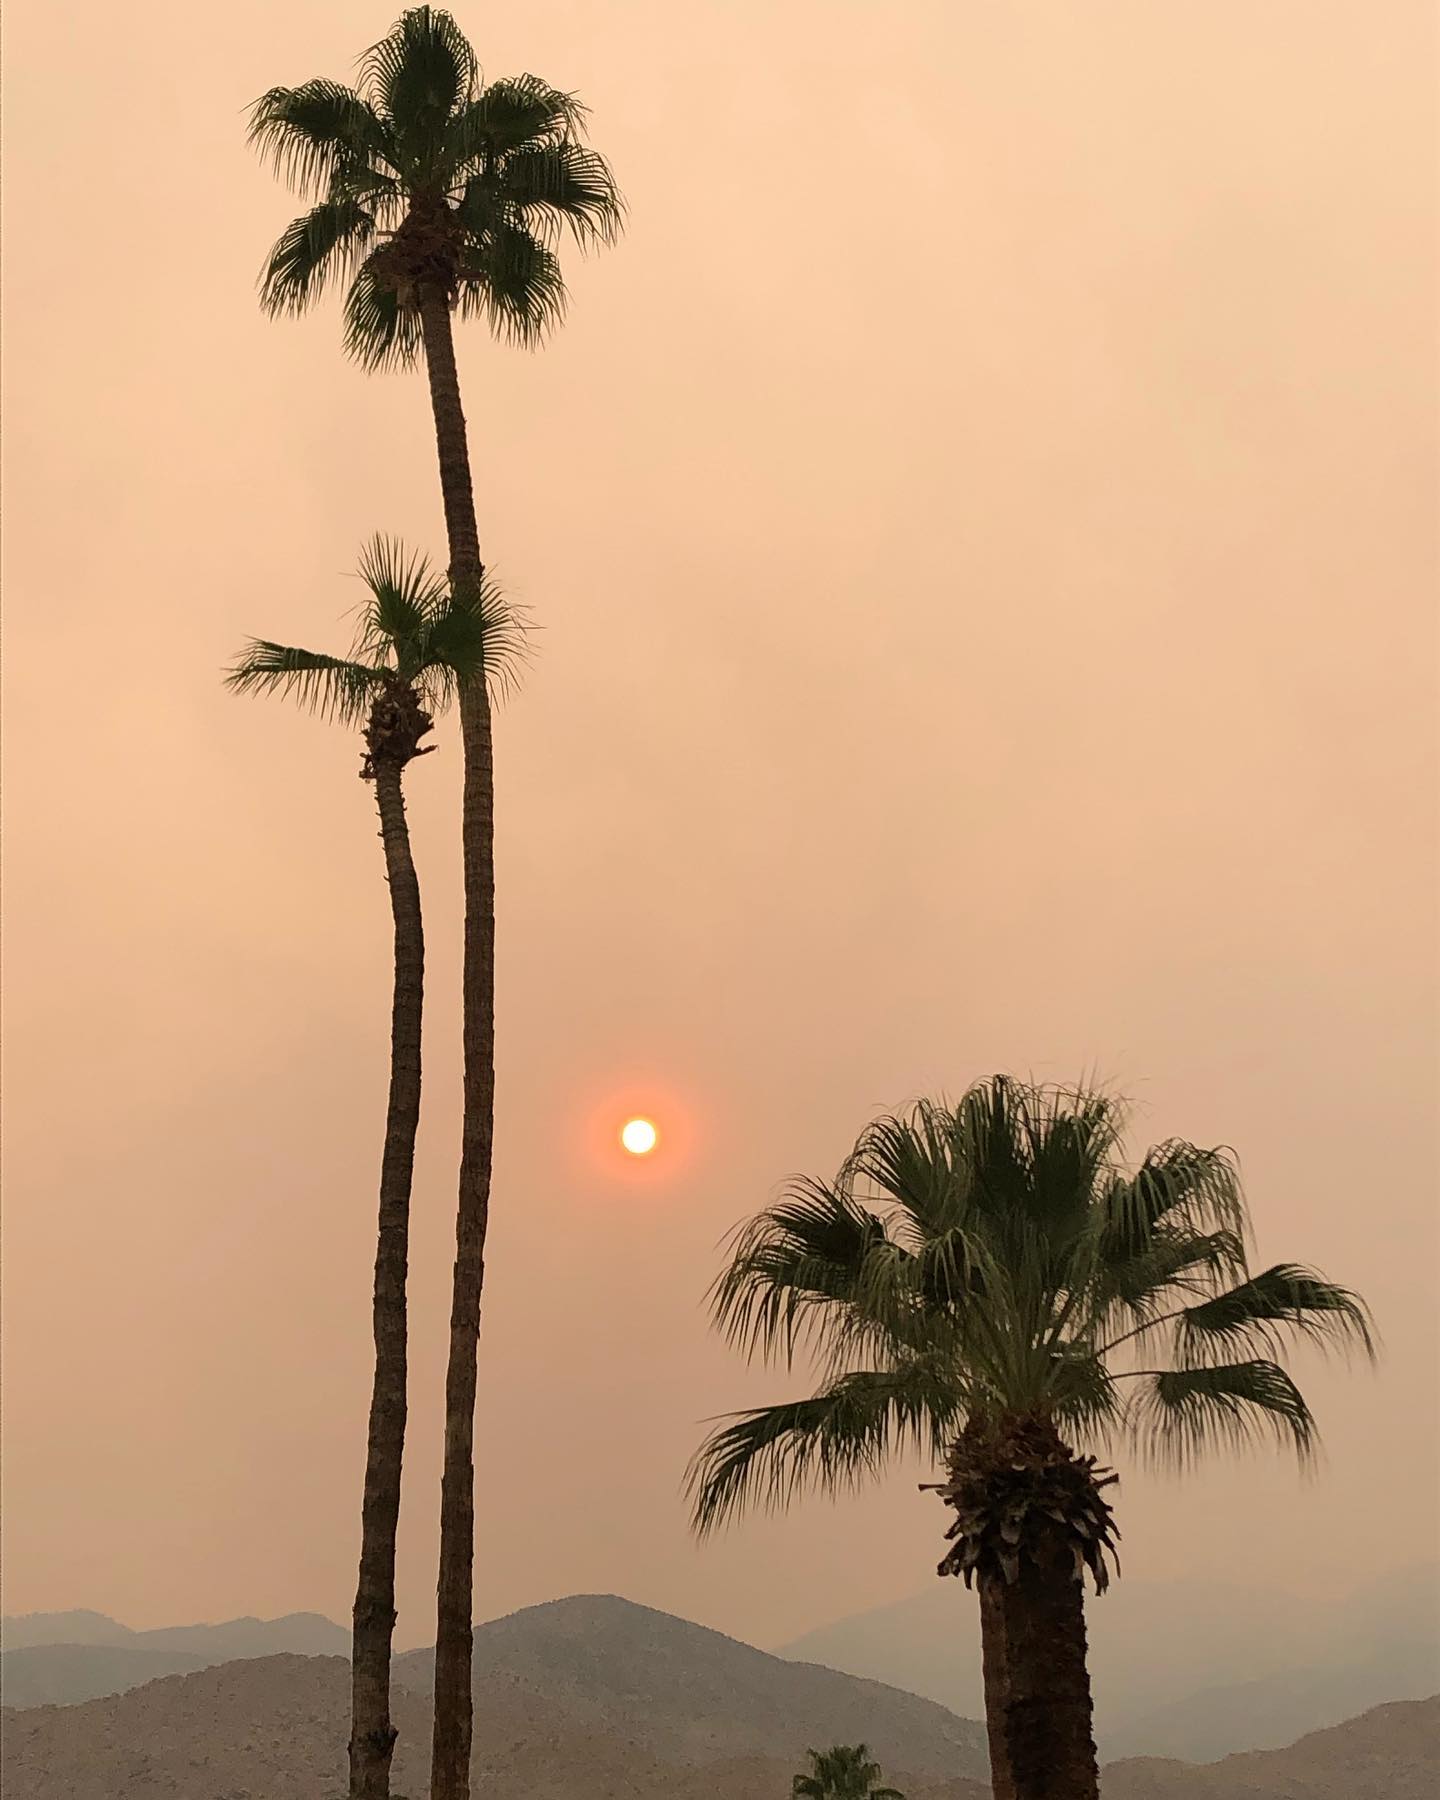 California burning. Safe in town, but the air is scary.